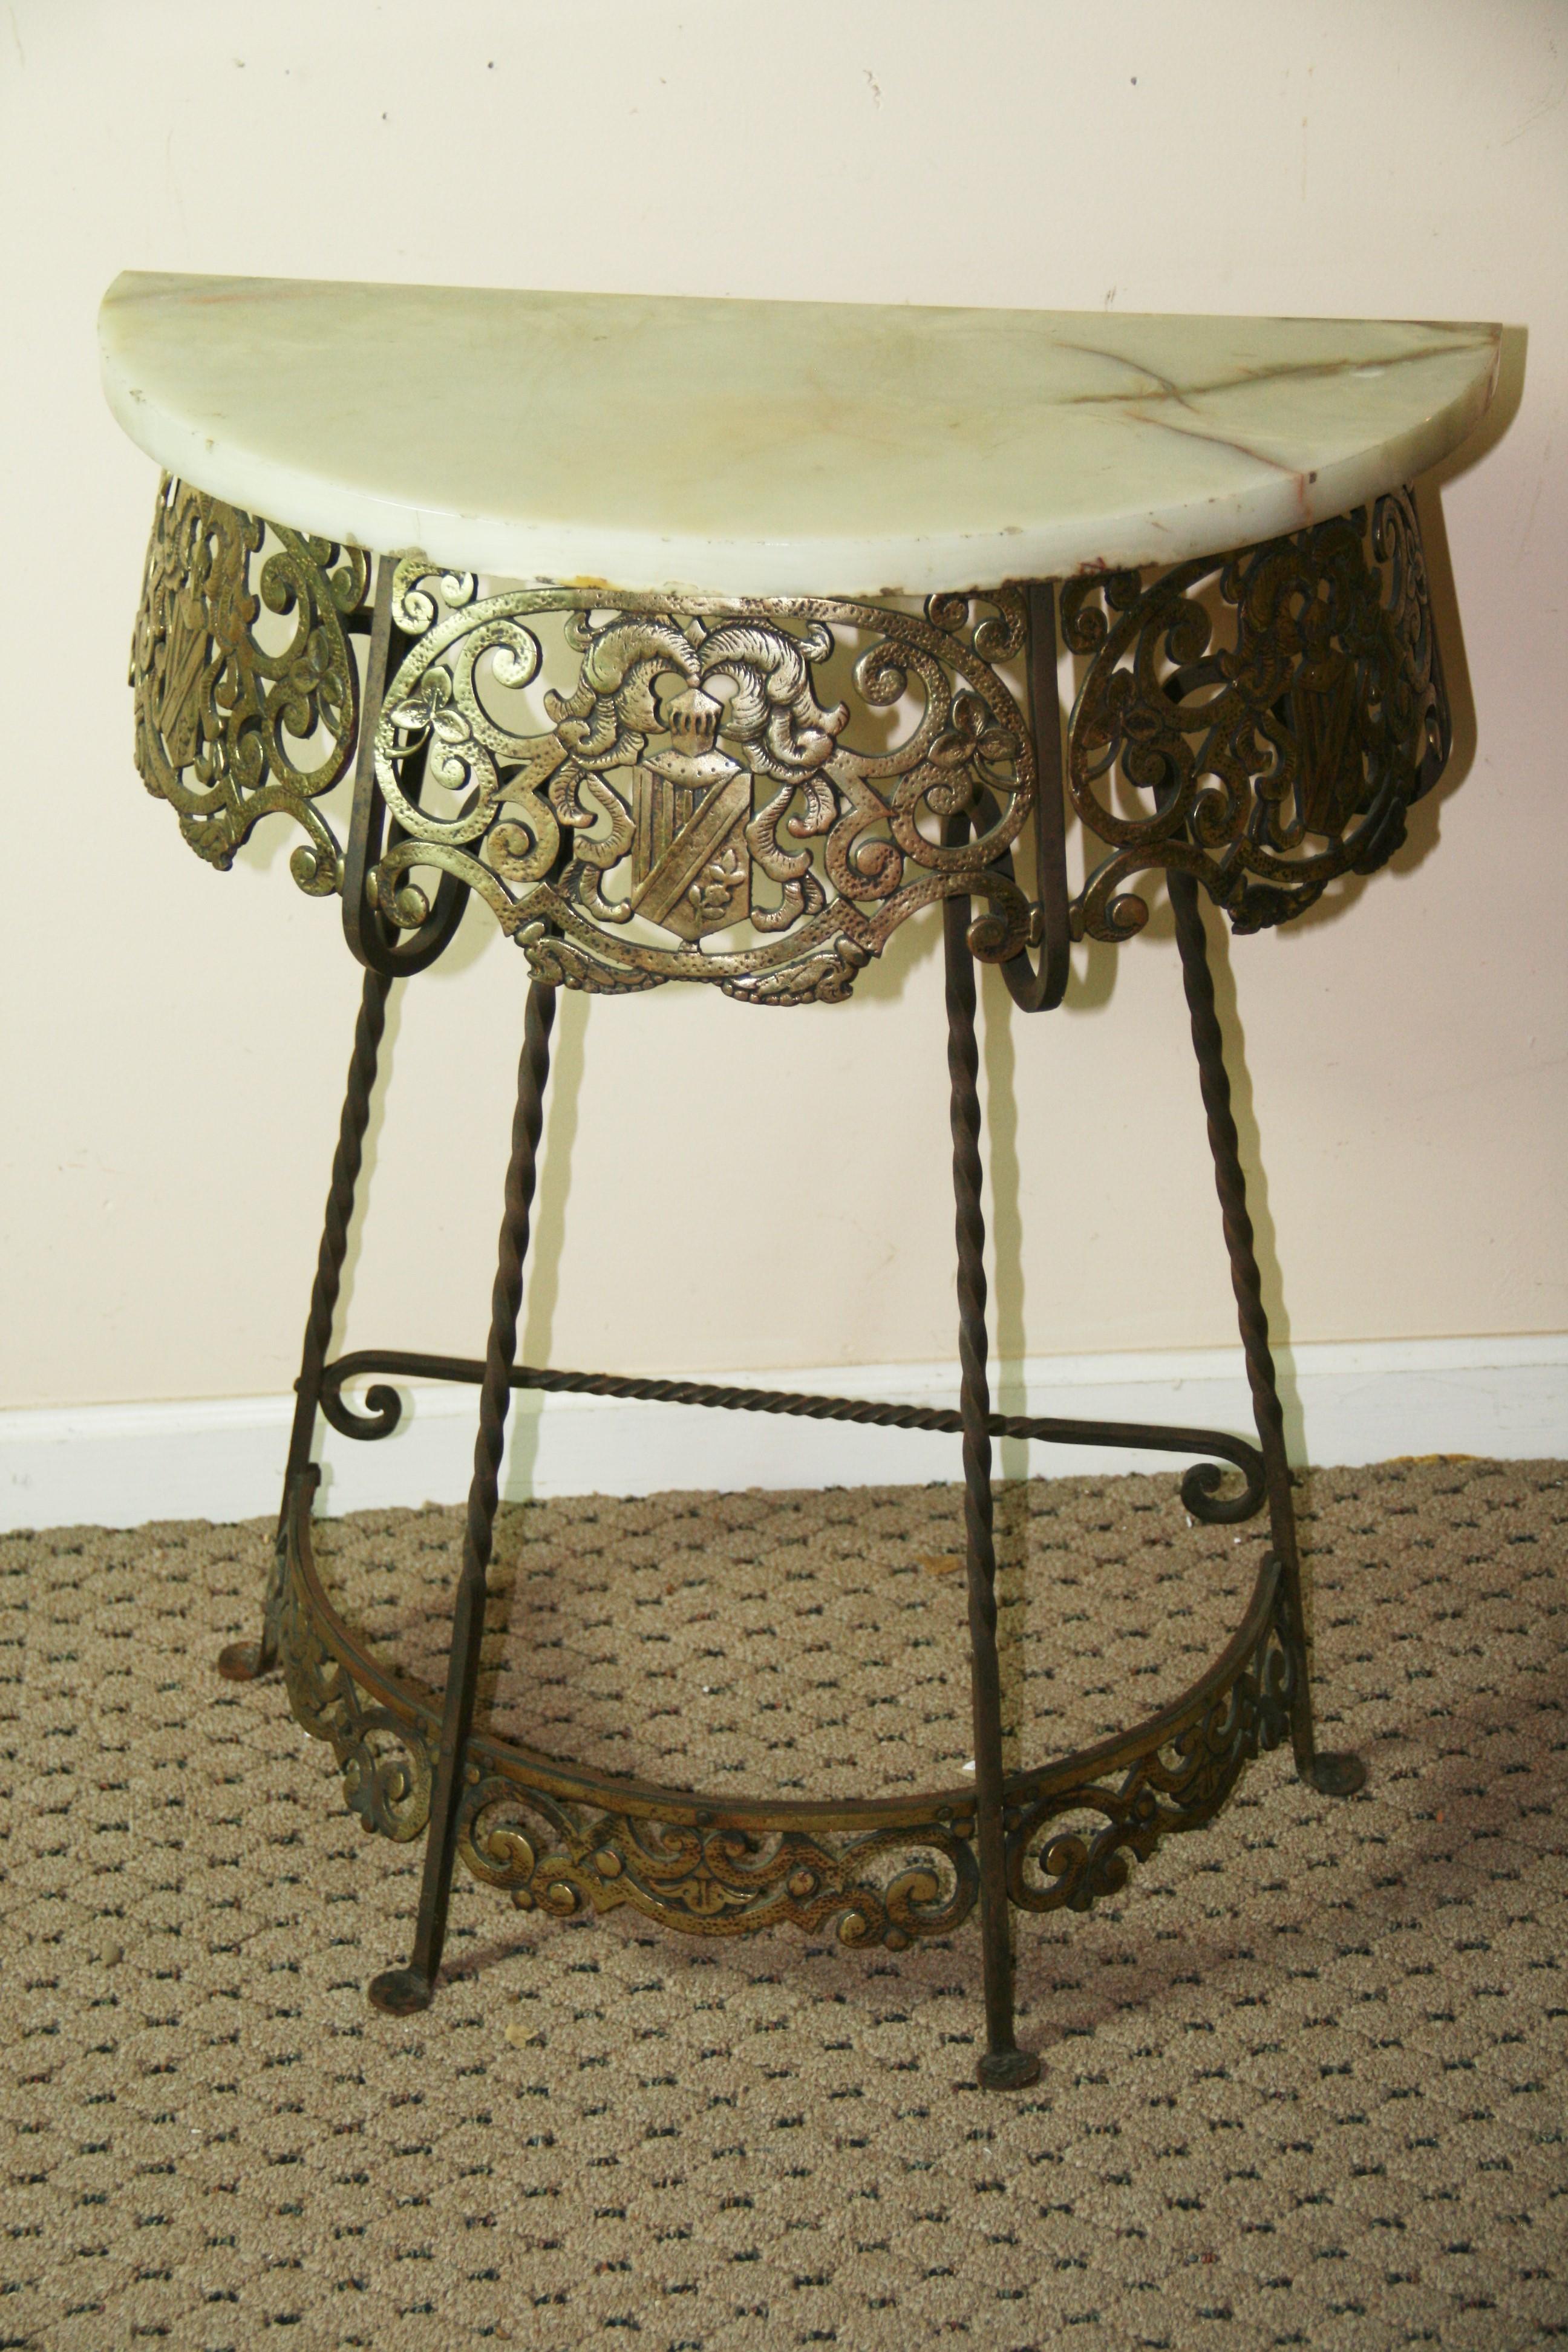 Mid-20th Century Antique Iron and Brass Heraldry Demi lune Console with Onyx Top